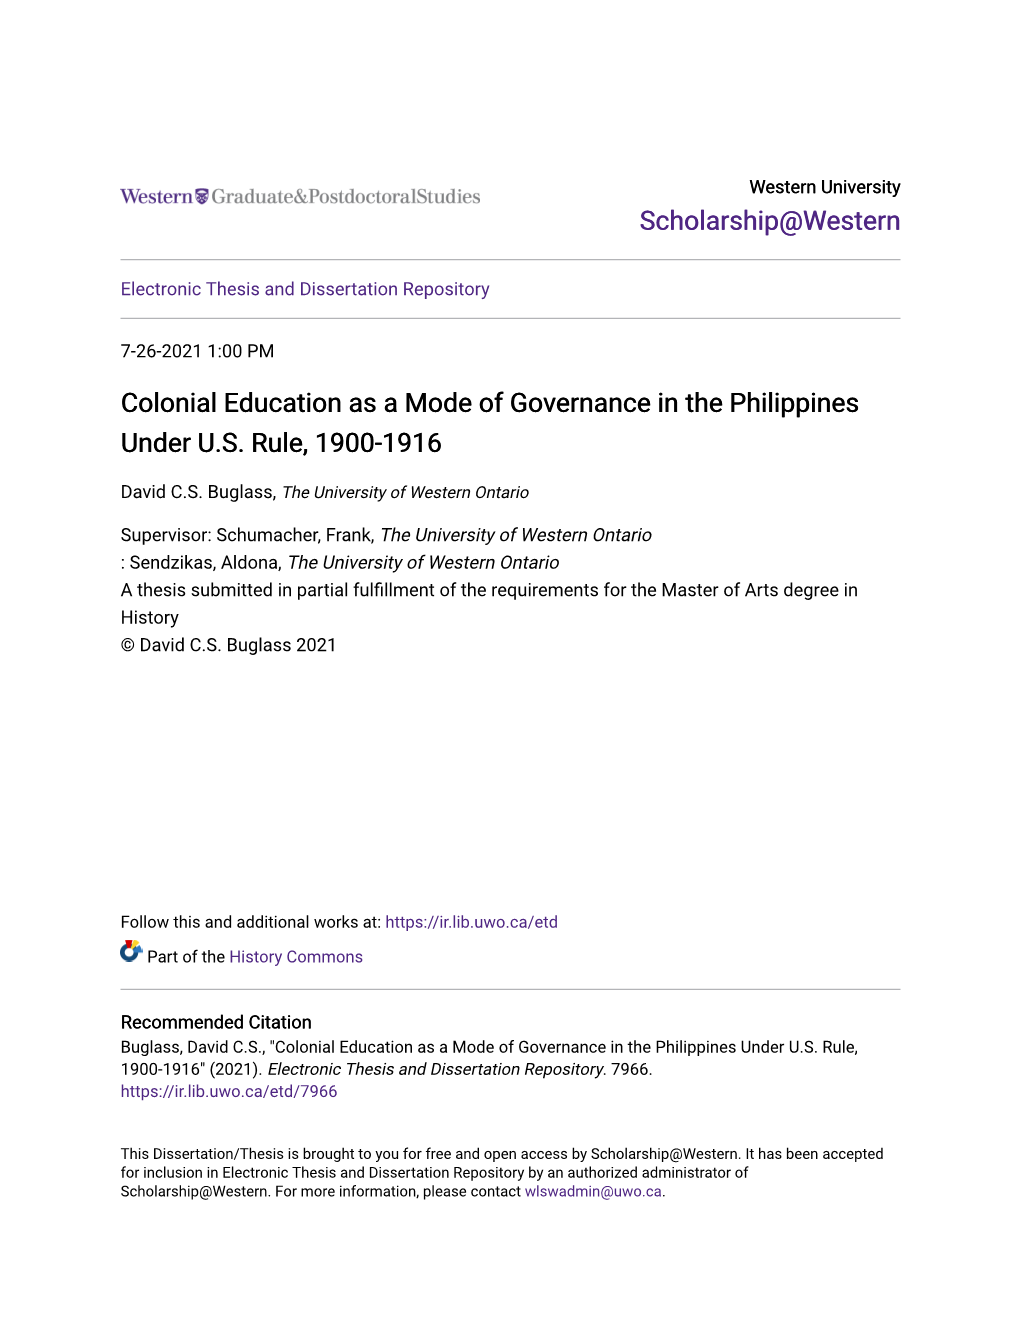 Colonial Education As a Mode of Governance in the Philippines Under U.S